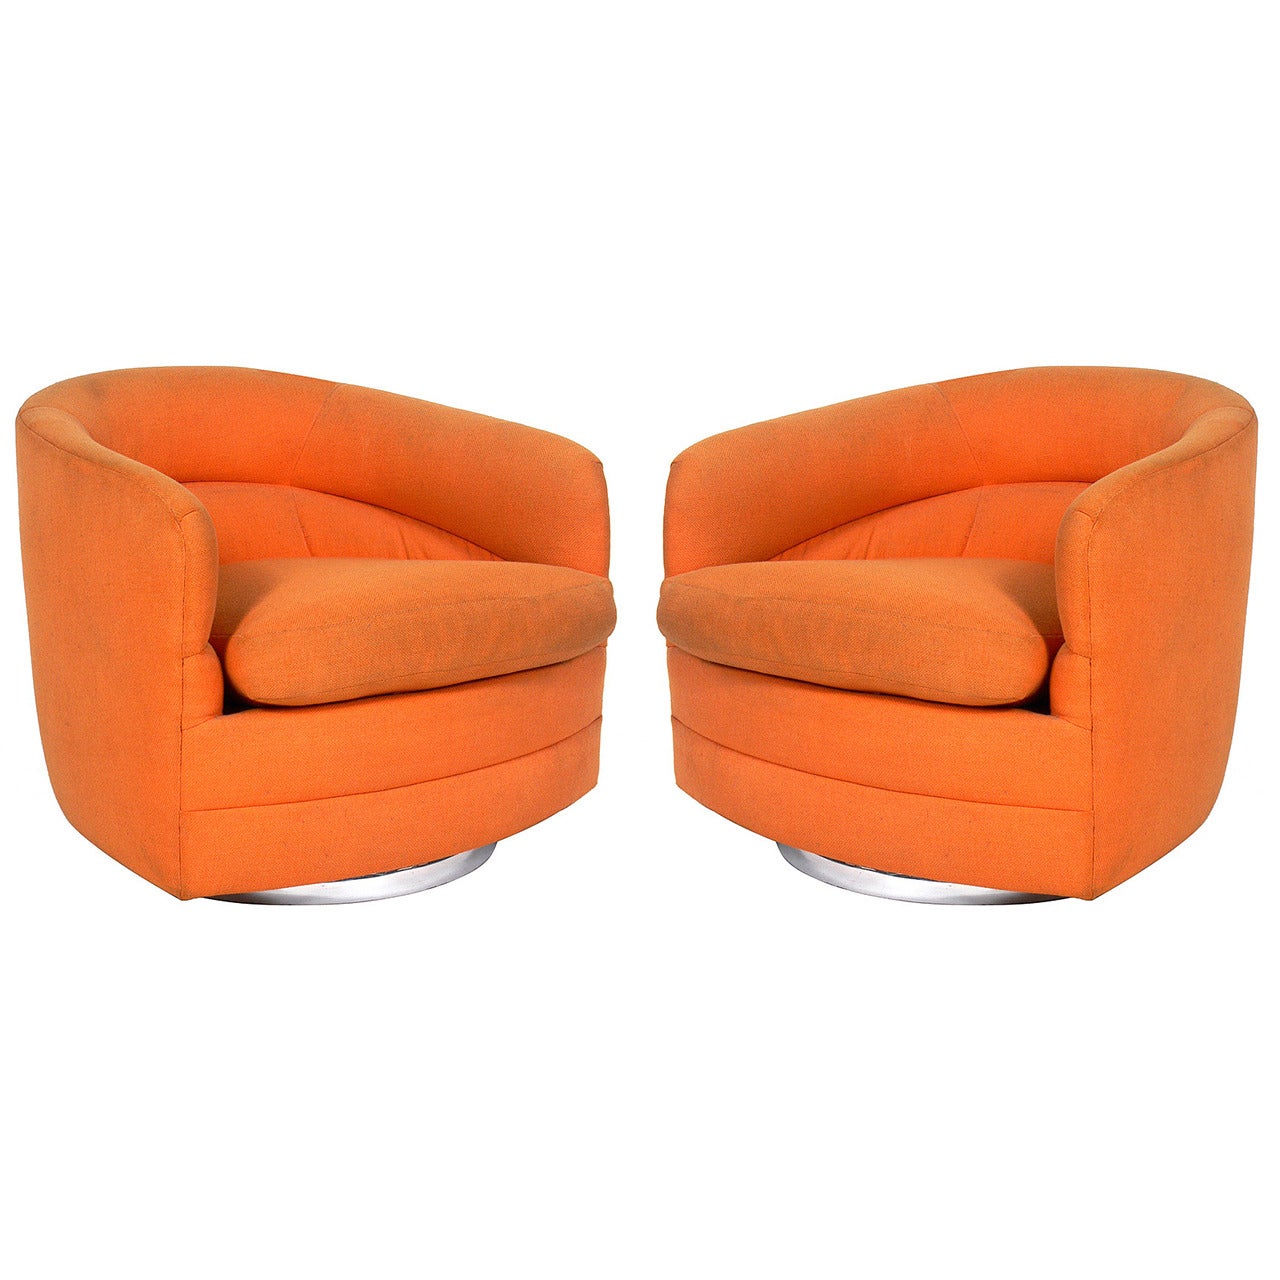 Pair of Modern Swivel Chairs designed by Milo Baughman